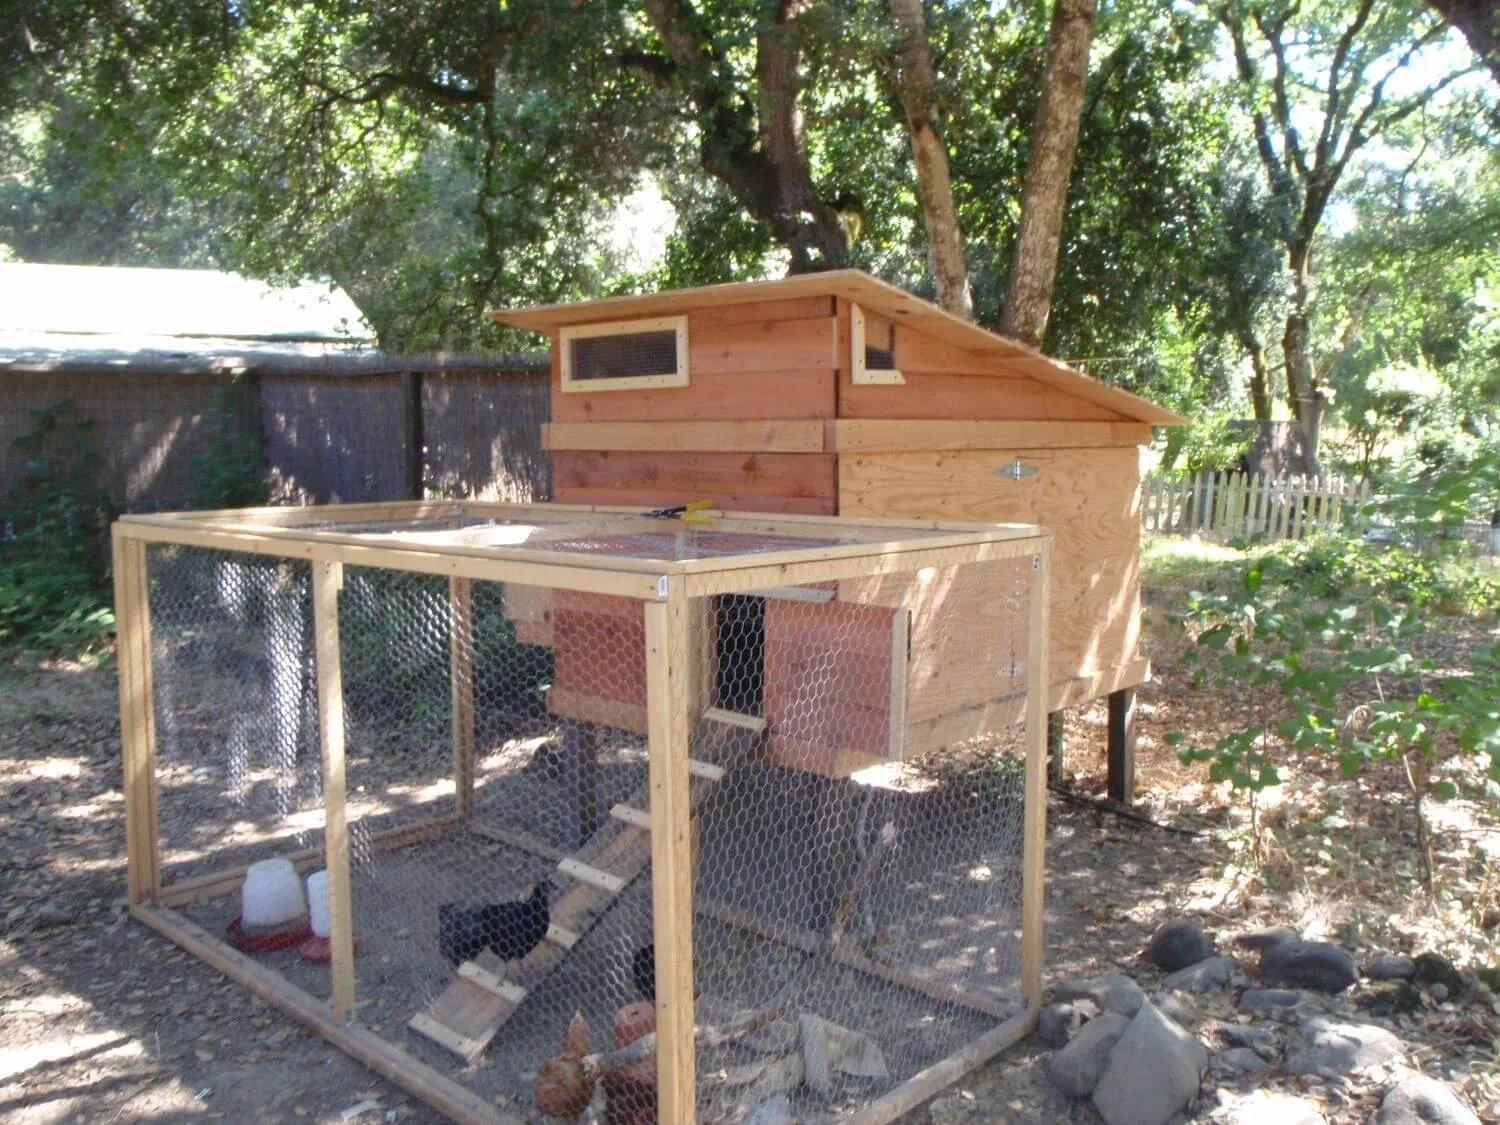 chicken coop with ramp that is not duck-friendly